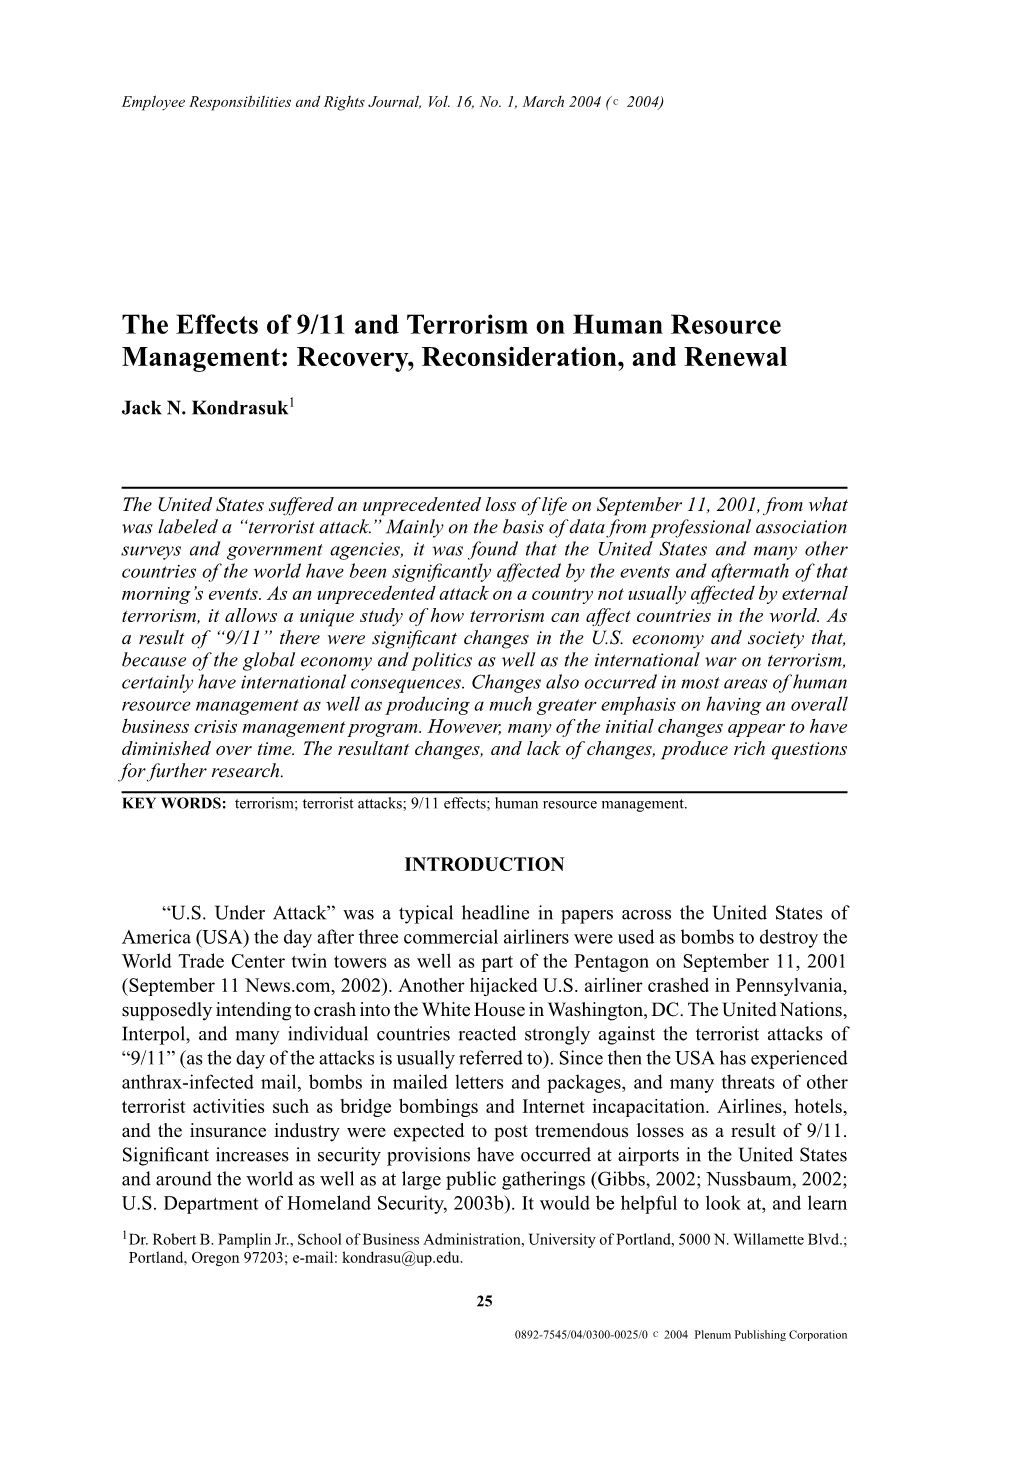 The Effects of 9/11 and Terrorism on Human Resource Management: Recovery, Reconsideration, and Renewal